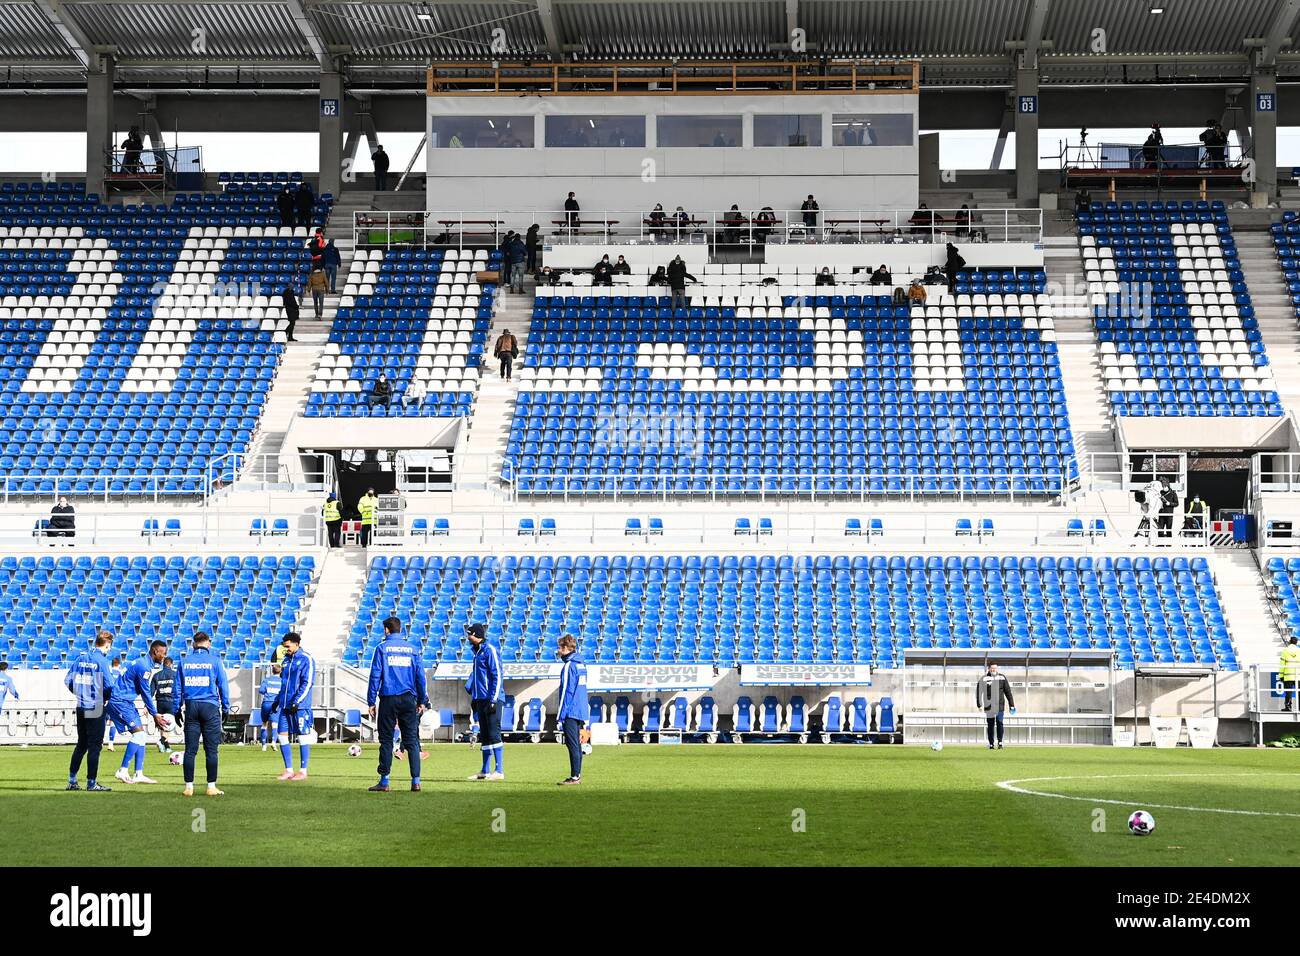 The provisional press stand on the new east stand of the Wildpark Stadium. GES / Football / 2. Bundesliga: Karlsruher SC - FC Heidenheim, 23.01.2021 Football / Soccer: 2nd League: Karlsruher Sport-Club vs FC Heidenheim, Karlsruhe, January 23, 2021 | usage worldwide Stock Photo